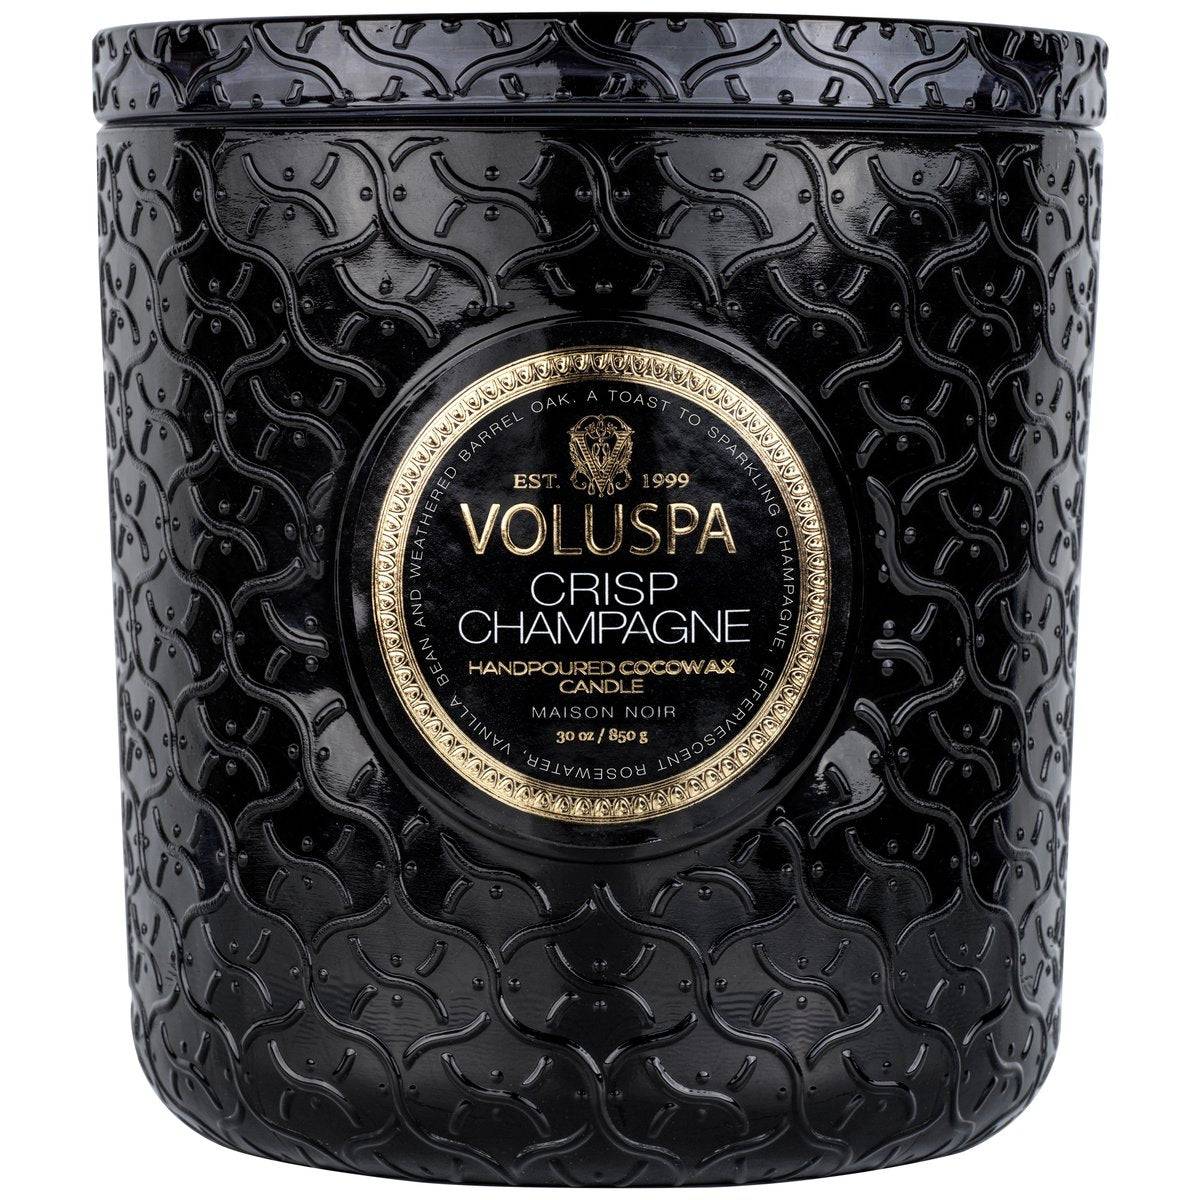 VOLUSPA - CRISP CHAMPAGNE LUXE CANDLE - Findlay Rowe Designs